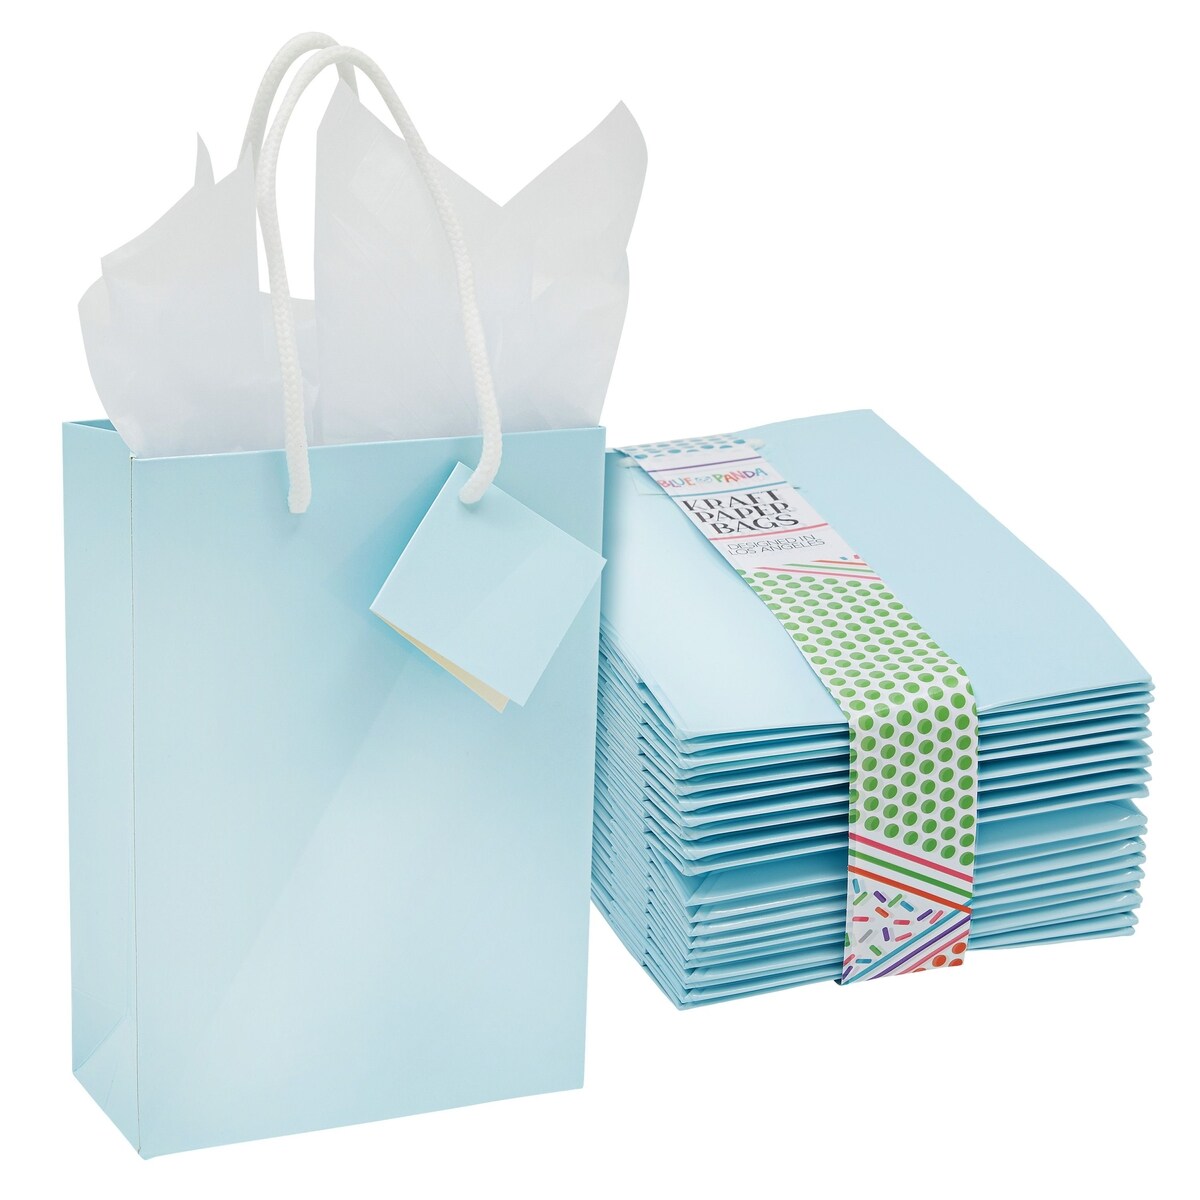 Wholesale Gift Bags Gift Wrap and Gift Boxes UK | PartyBox Wholesale Essex